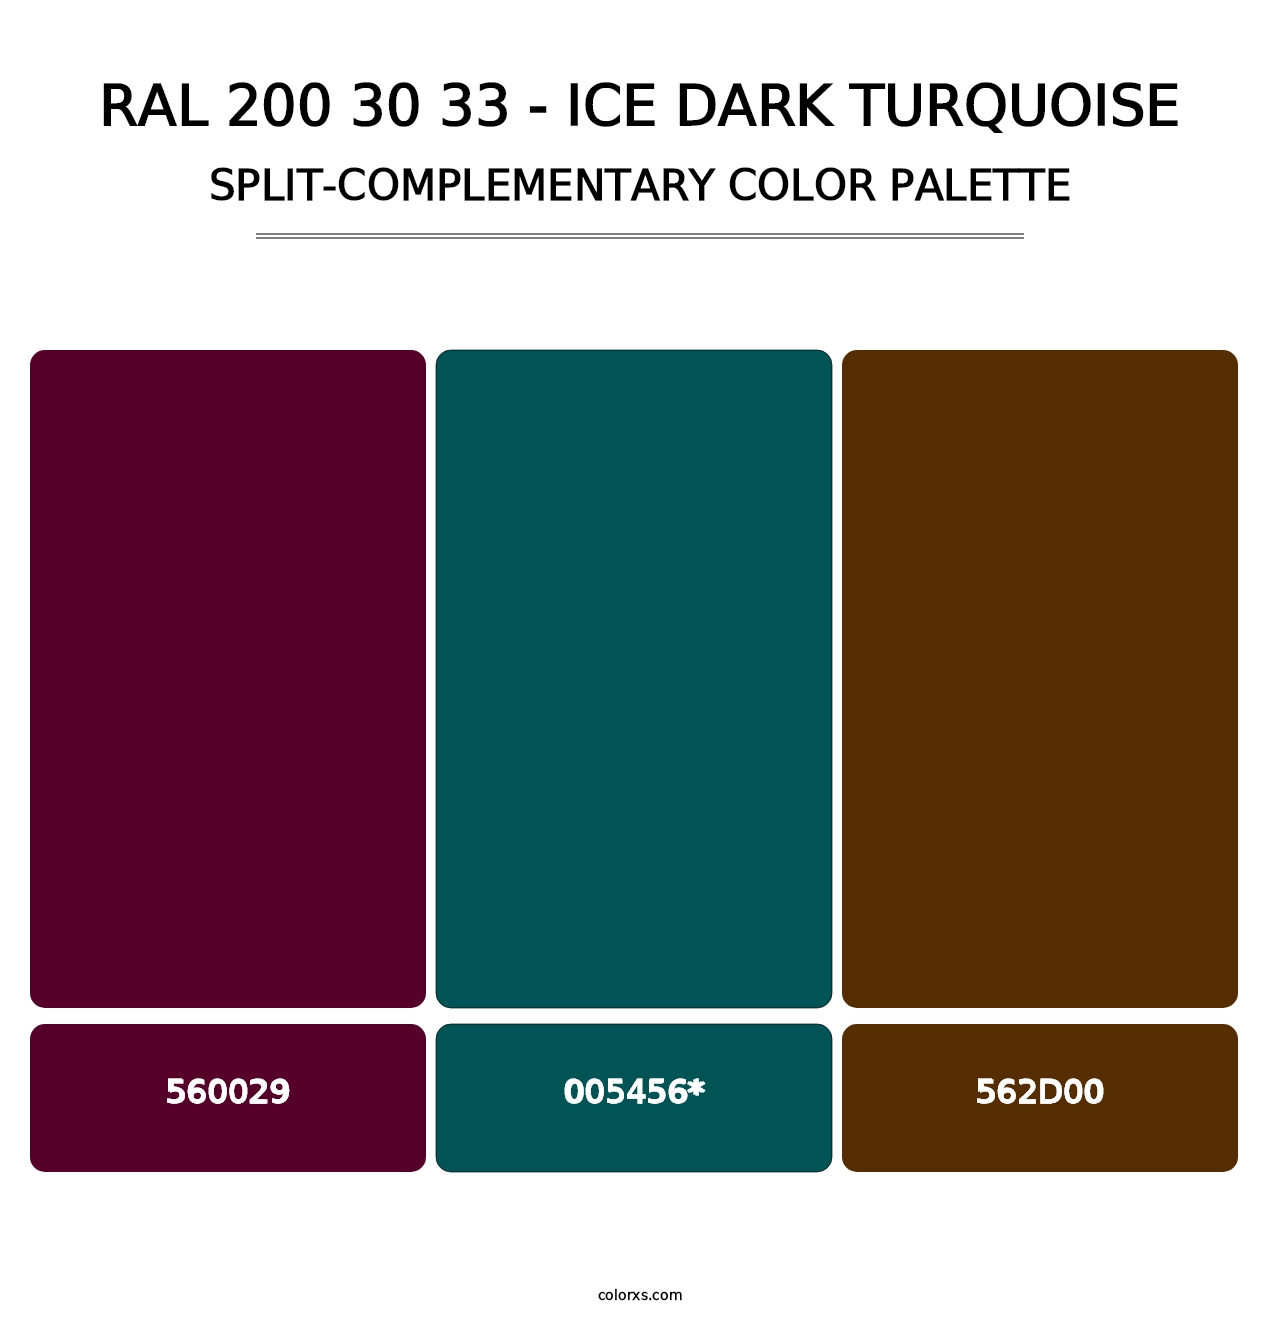 RAL 200 30 33 - Ice Dark Turquoise - Split-Complementary Color Palette